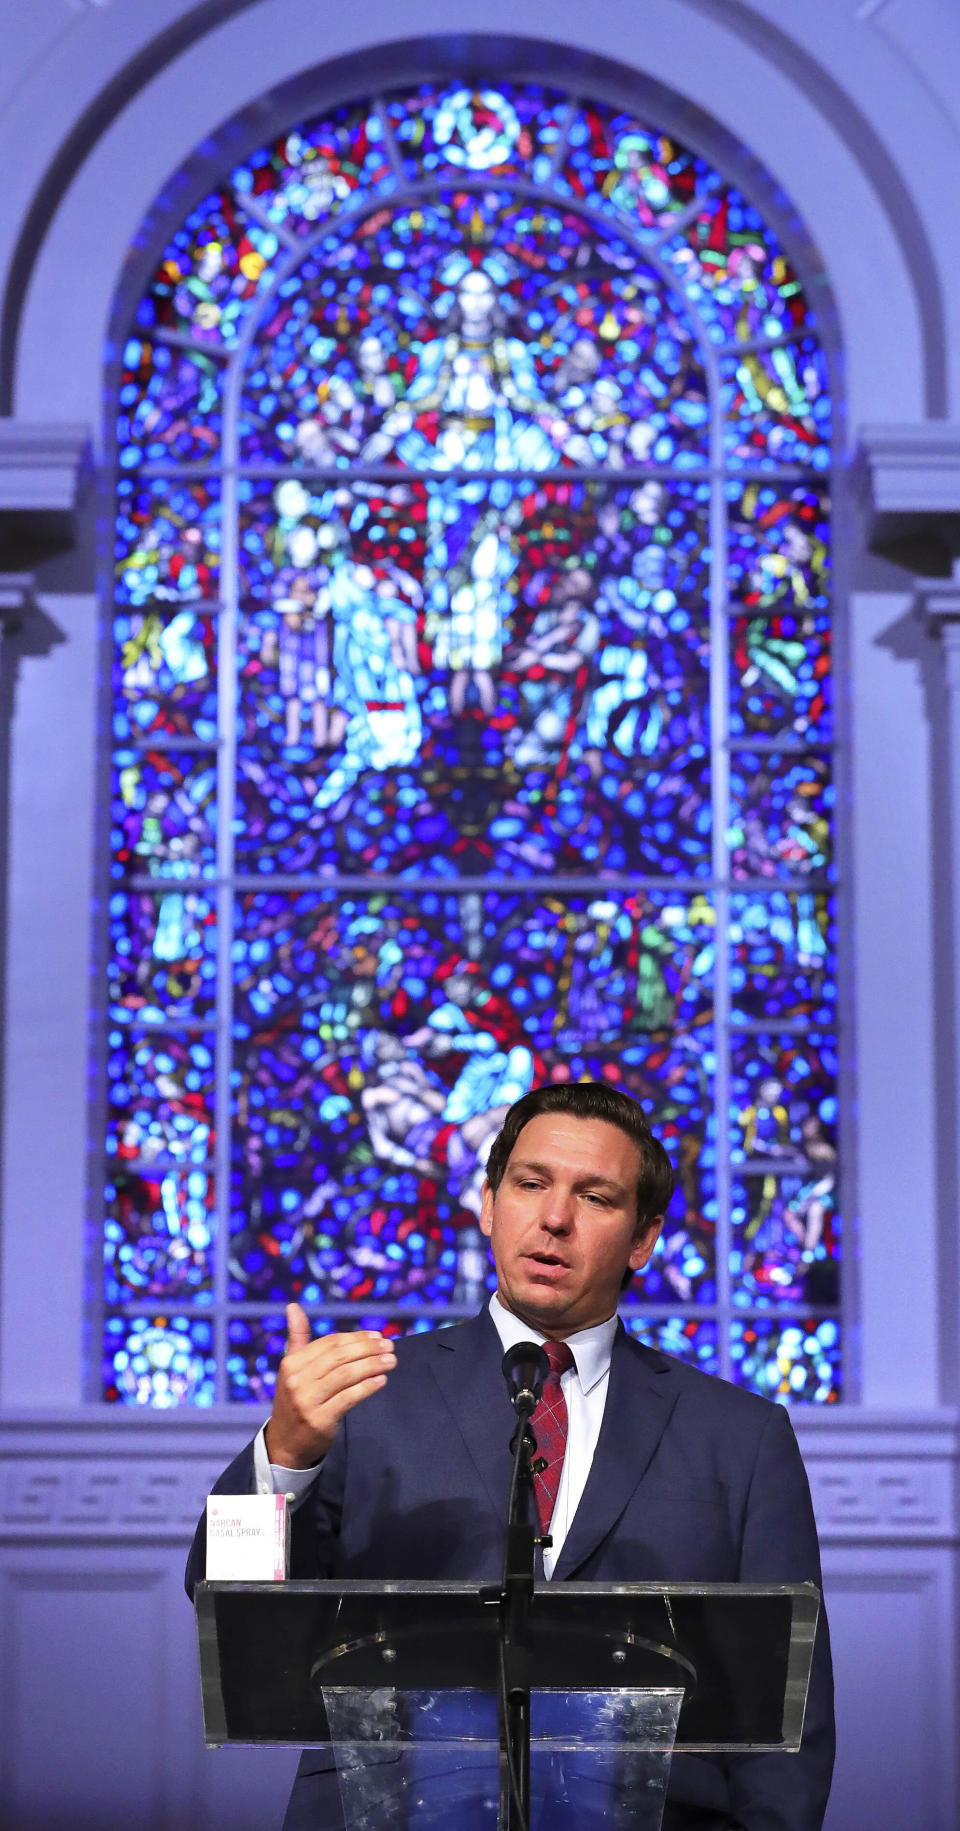 FILE - Florida Gov. Ron DeSantis delivers remarks during the Project Opioid conference at First Presbyterian Church, in Orlando, Fla., Tuesday, Aug. 20, 2019. (Joe Burbank/Orlando Sentinel via AP)